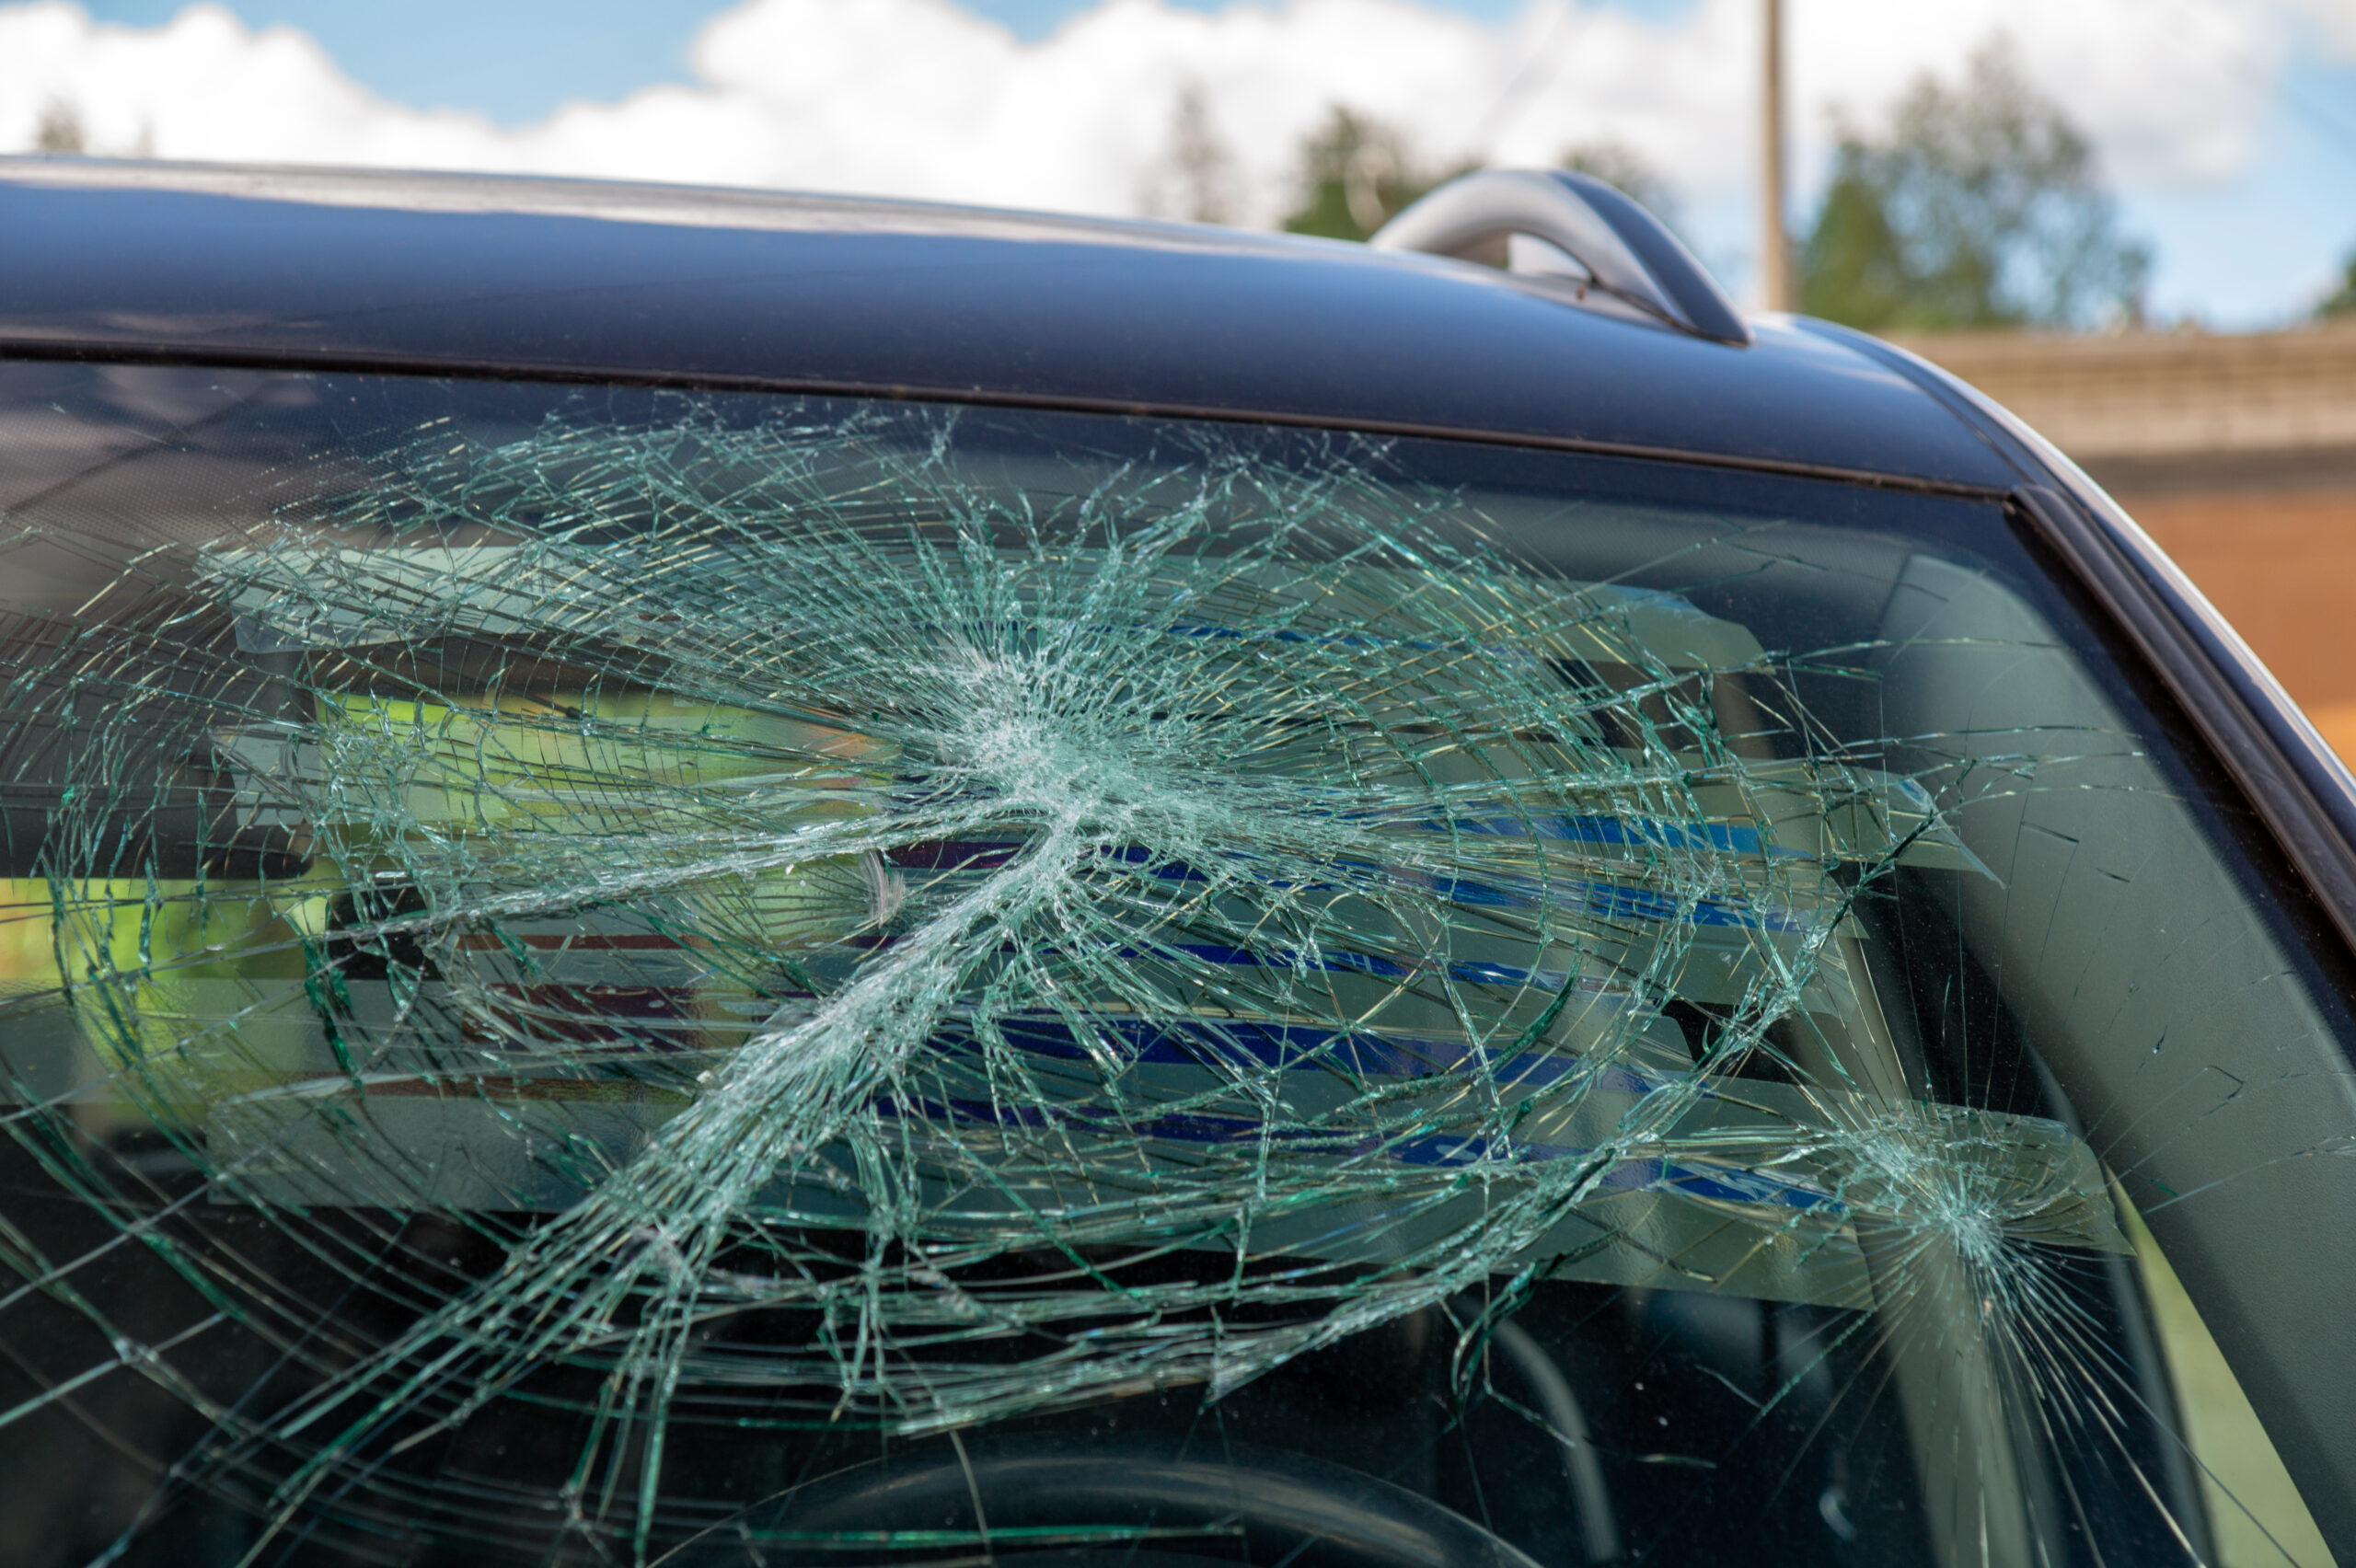 A broken car windshield after a hit and run accident.